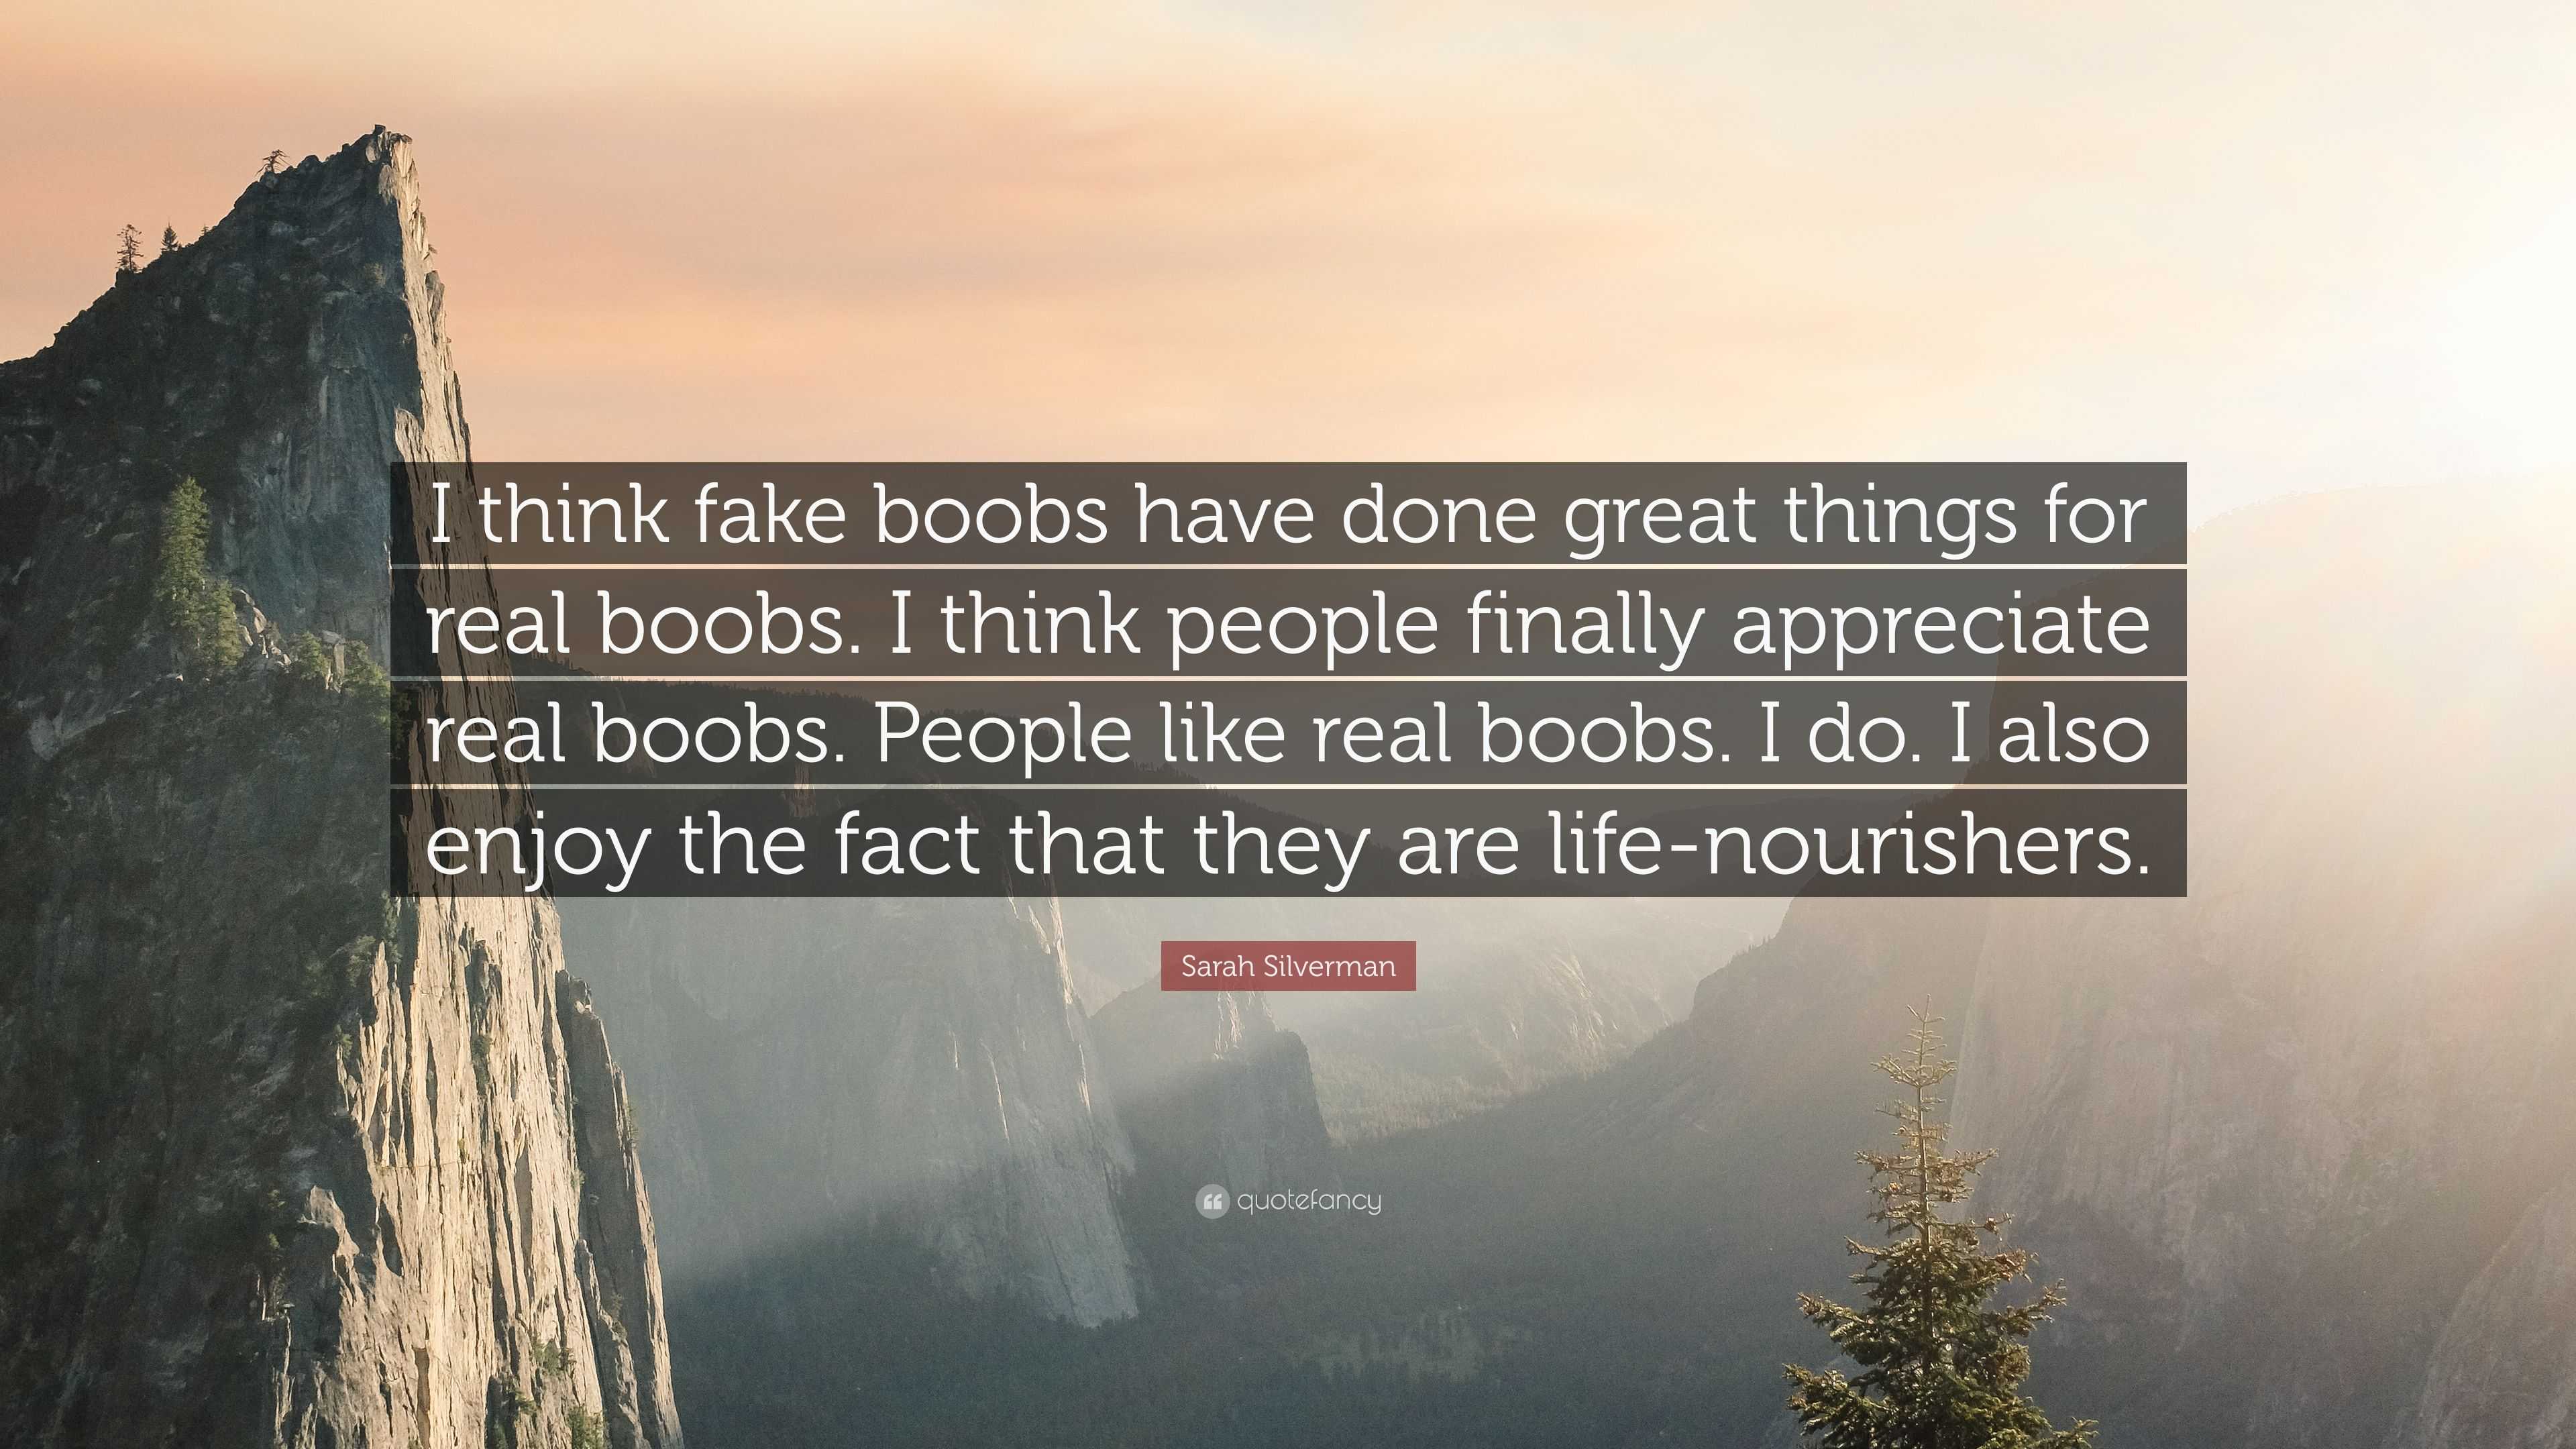 Sarah Silverman Quote: “I think fake boobs have done great things